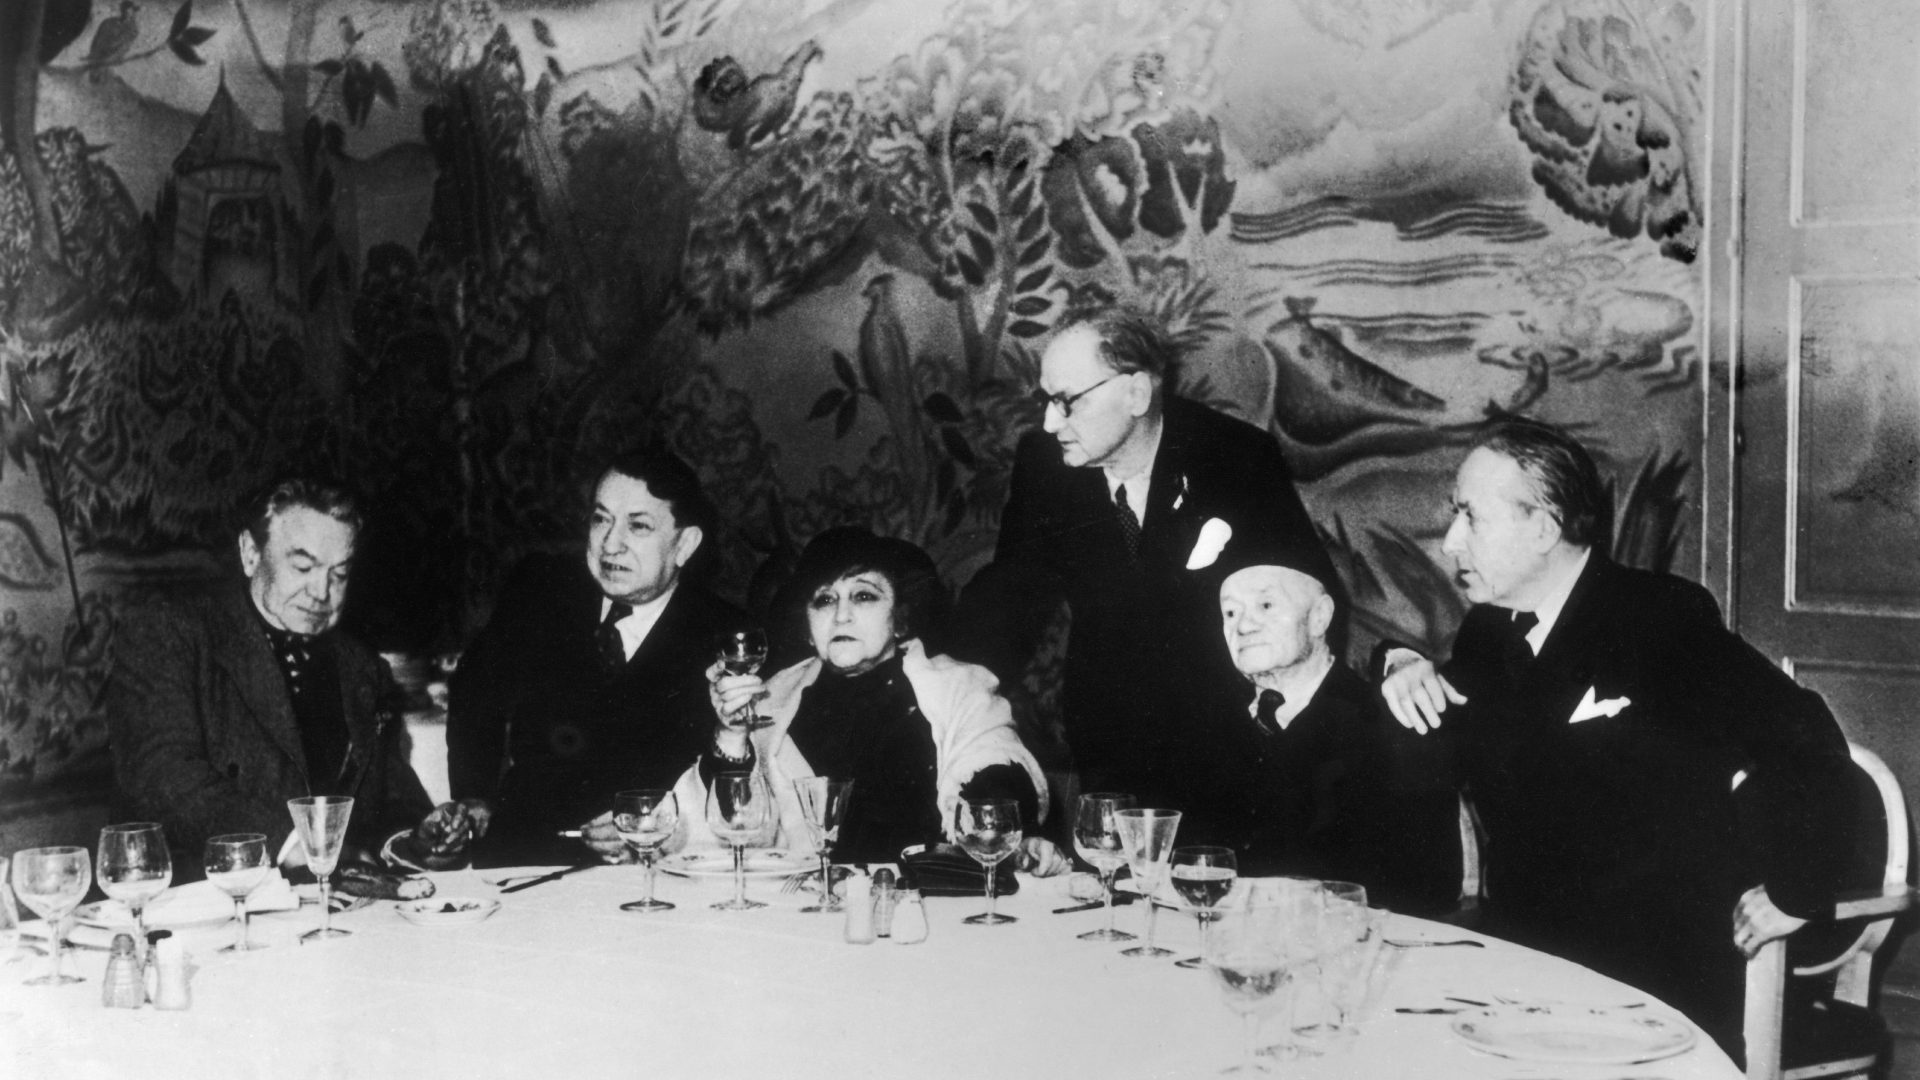 The members of the 1945 Prix Goncourt jury gather around a table at the Drouant restaurant in Paris. From left to right: J-H Rosny jeune, Francis 
Carco, Colette, André Billy, Lucien Descaves and Roland Dorgelès 
Photo: Keystone-France/Gamma Keystone/Getty